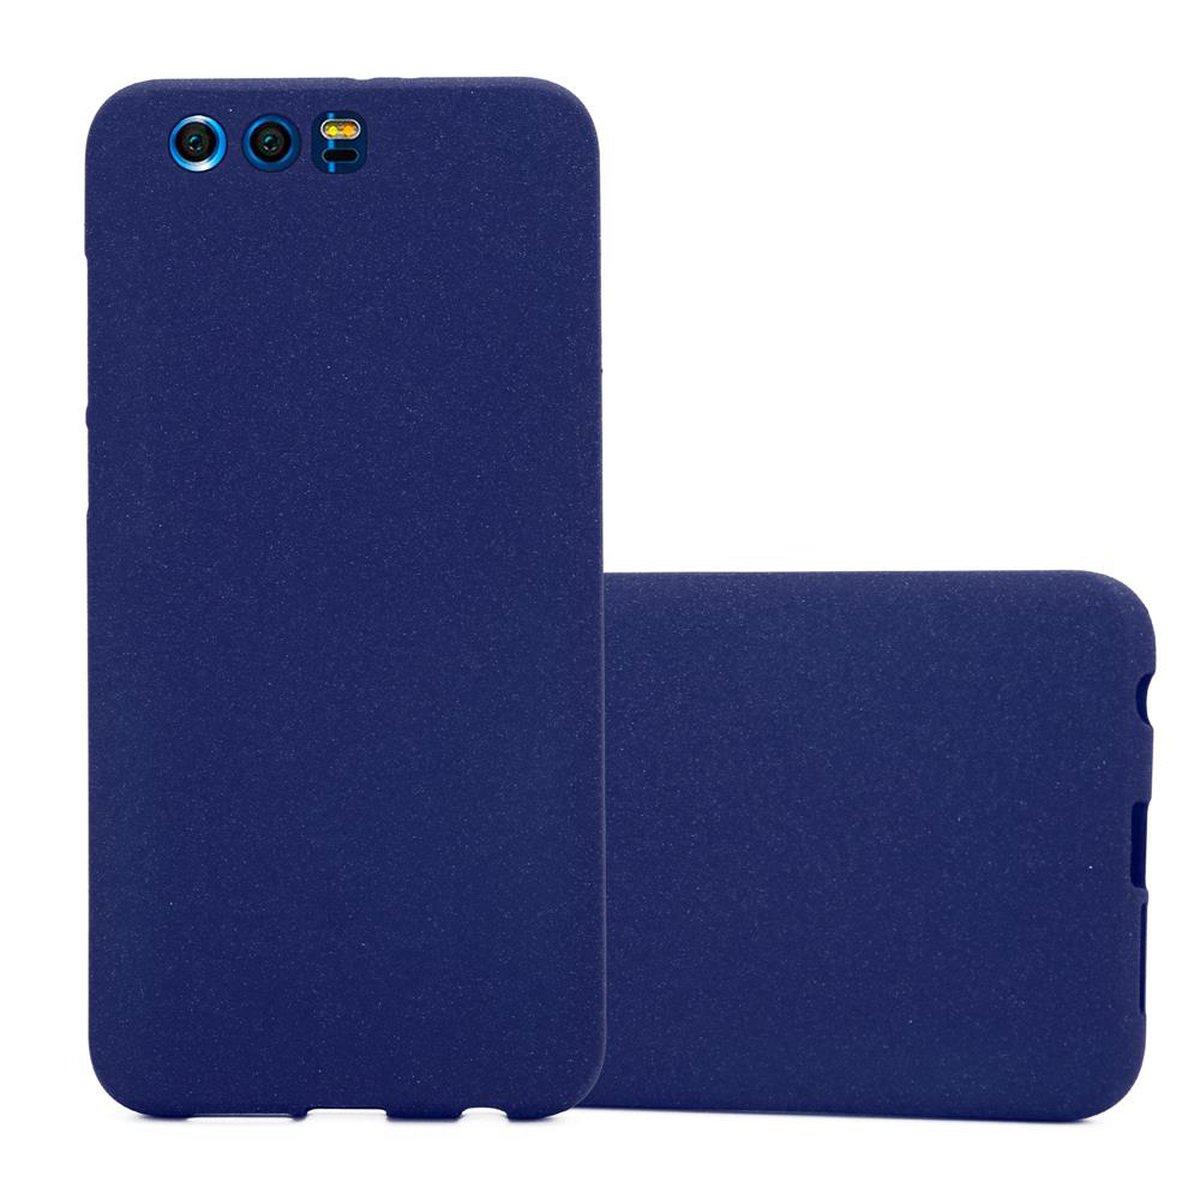 BLAU CADORABO 9, TPU Honor, Backcover, FROST DUNKEL Schutzhülle, Frosted